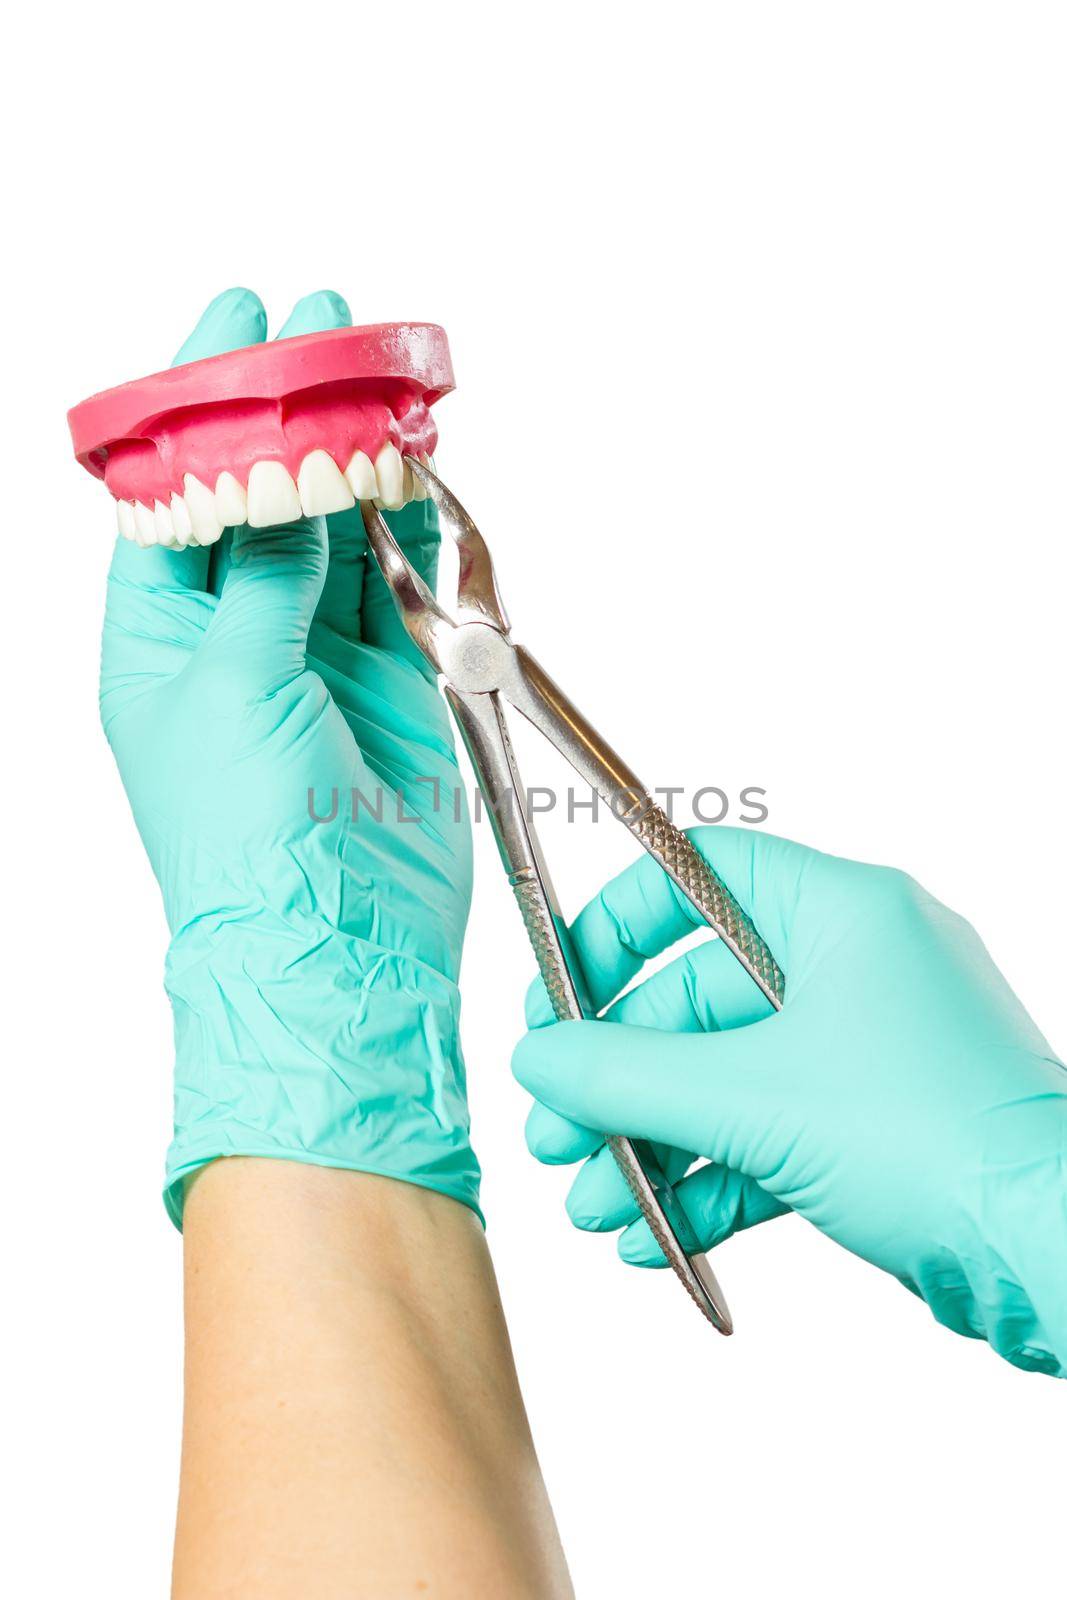 Dentist with a layout of the human jaw is showing how to extract a sick tooth. Focus on stainless steel dental tongs or pliers.